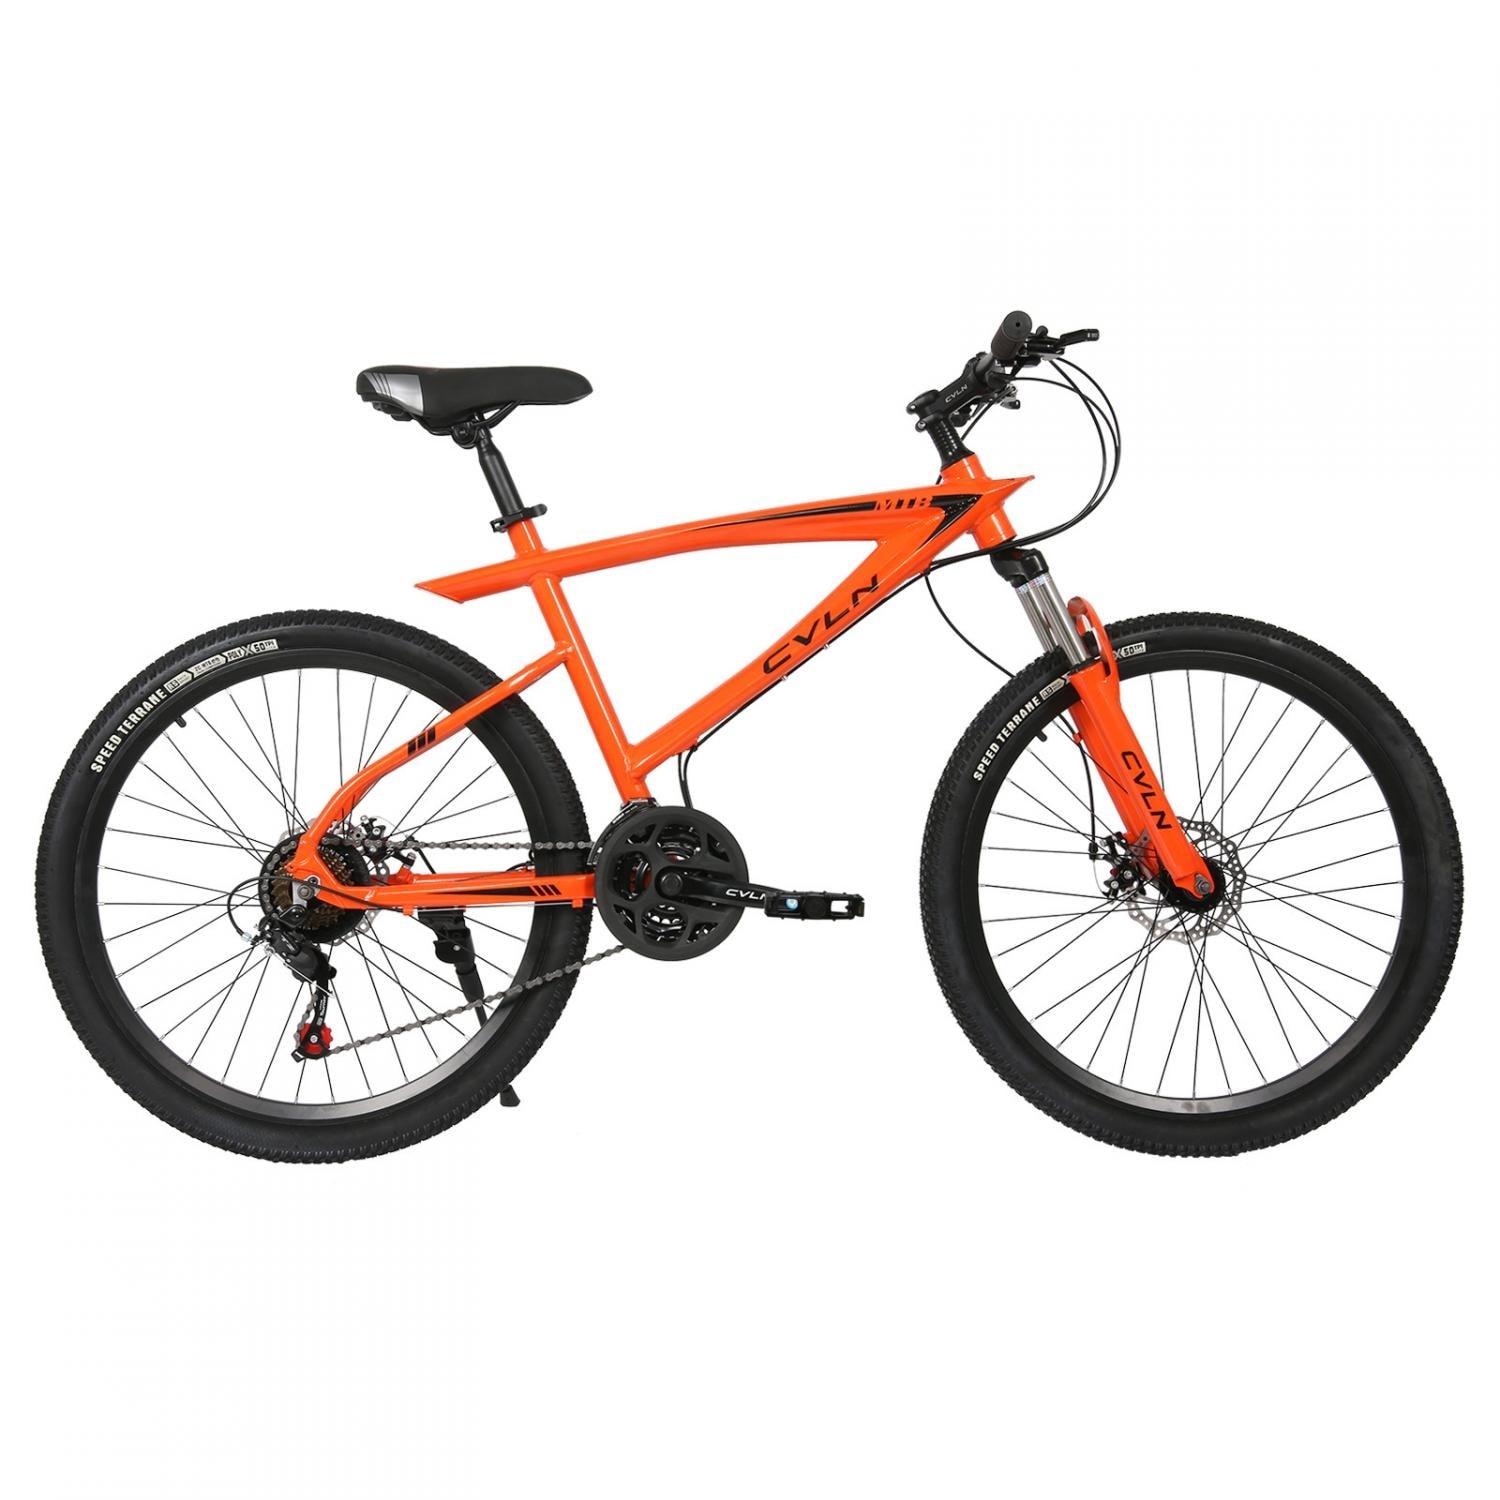 Shop Aster Classy Bicycle with 21 Gear 26 Inch